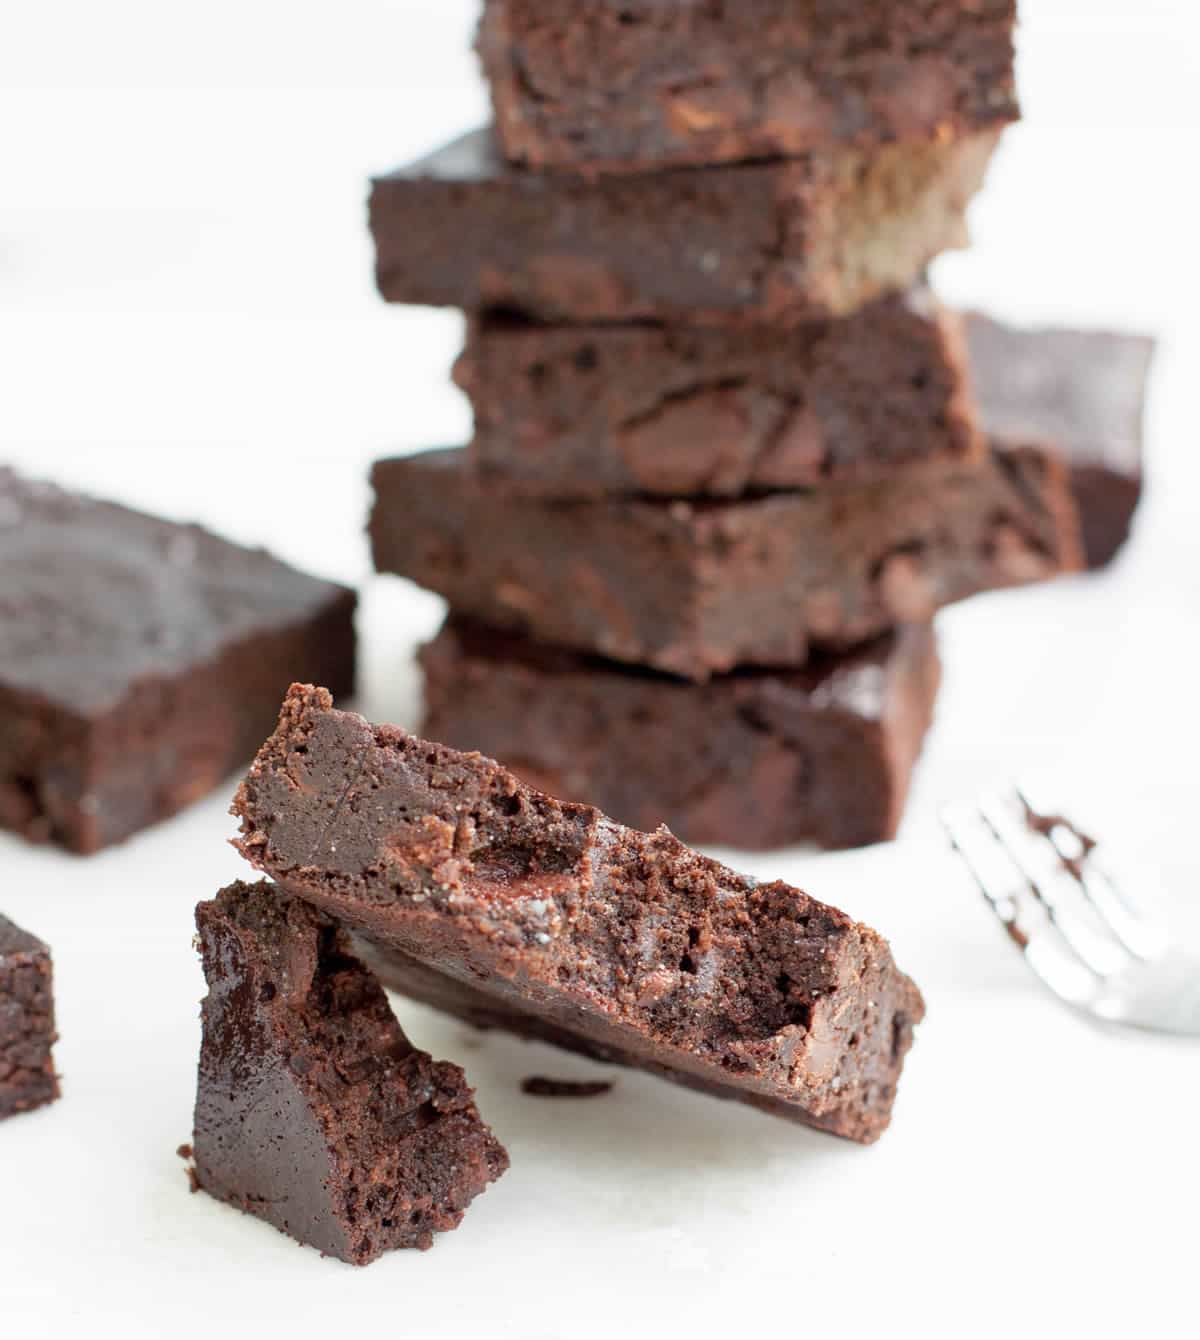 Fudgy Zucchini Brownies mix up easily in your food processor! (No grating!) Lower in sugar, flour and fat than many traditional brownie recipes.